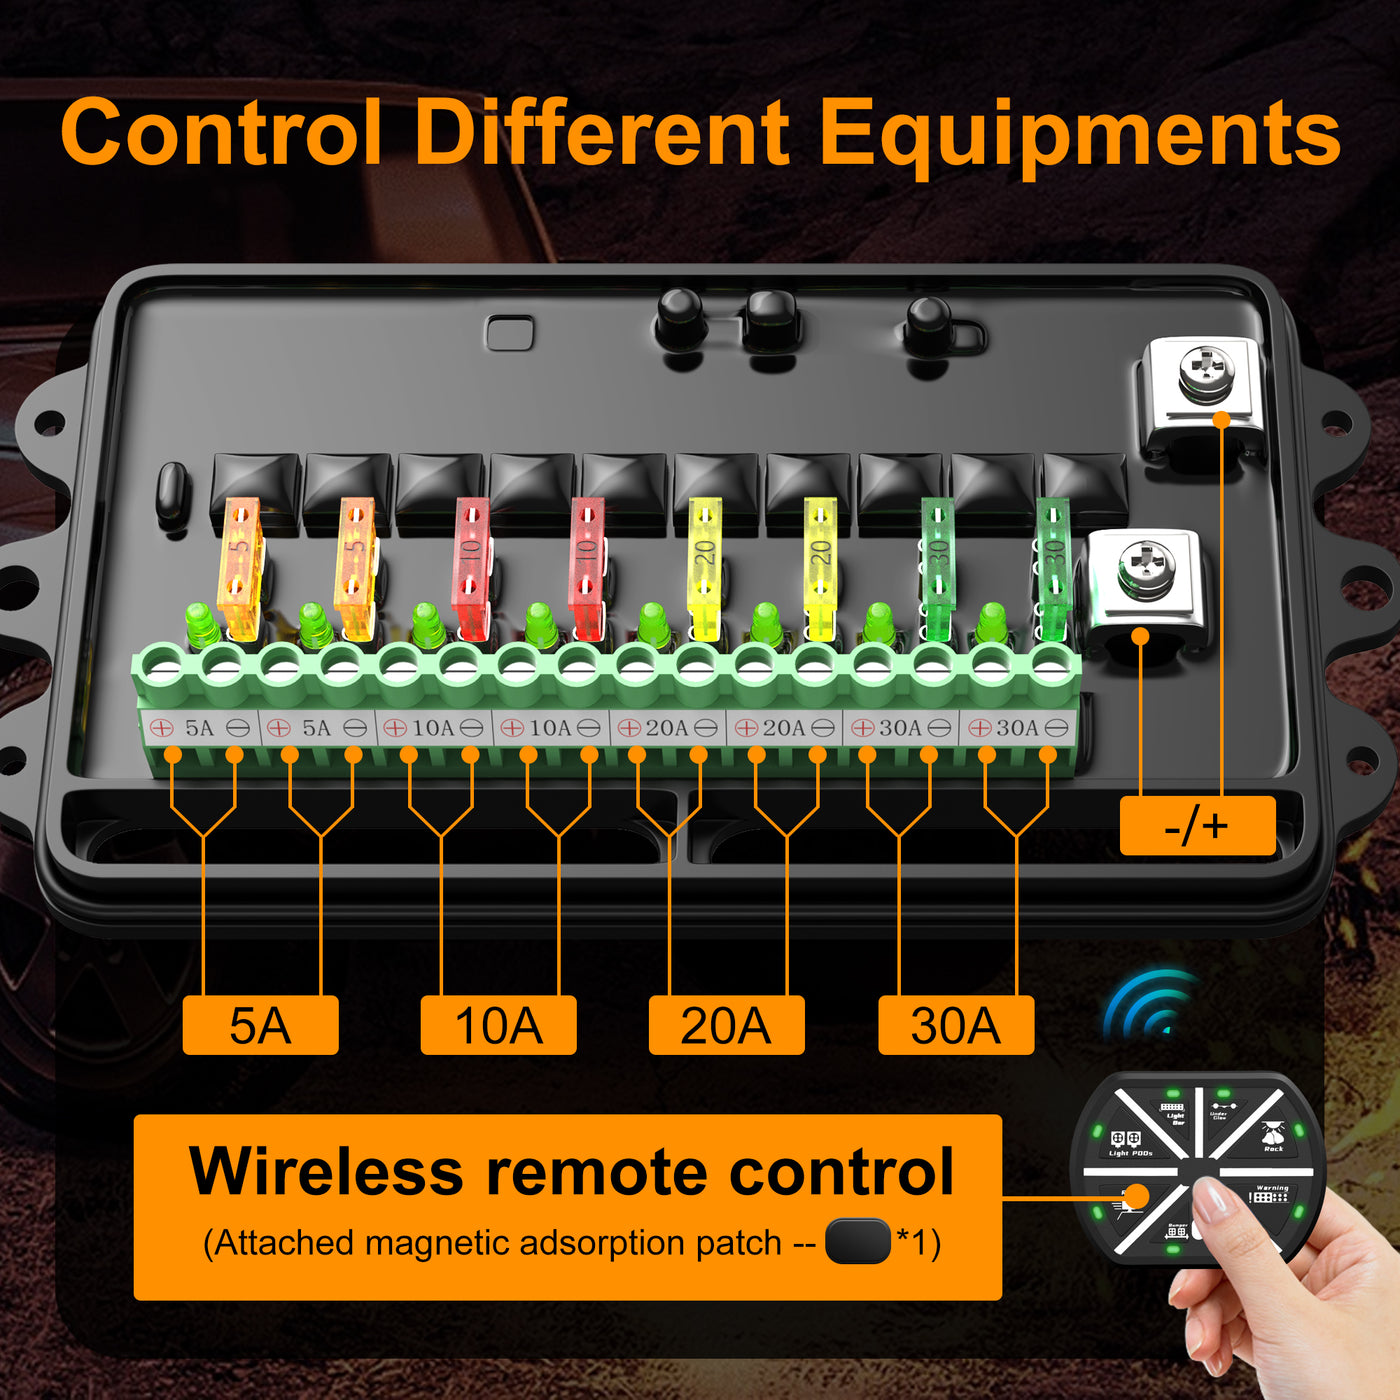 PN-SPRF8-G 8 Gang Wireless Remote Control Panel with Wireless Remote Control